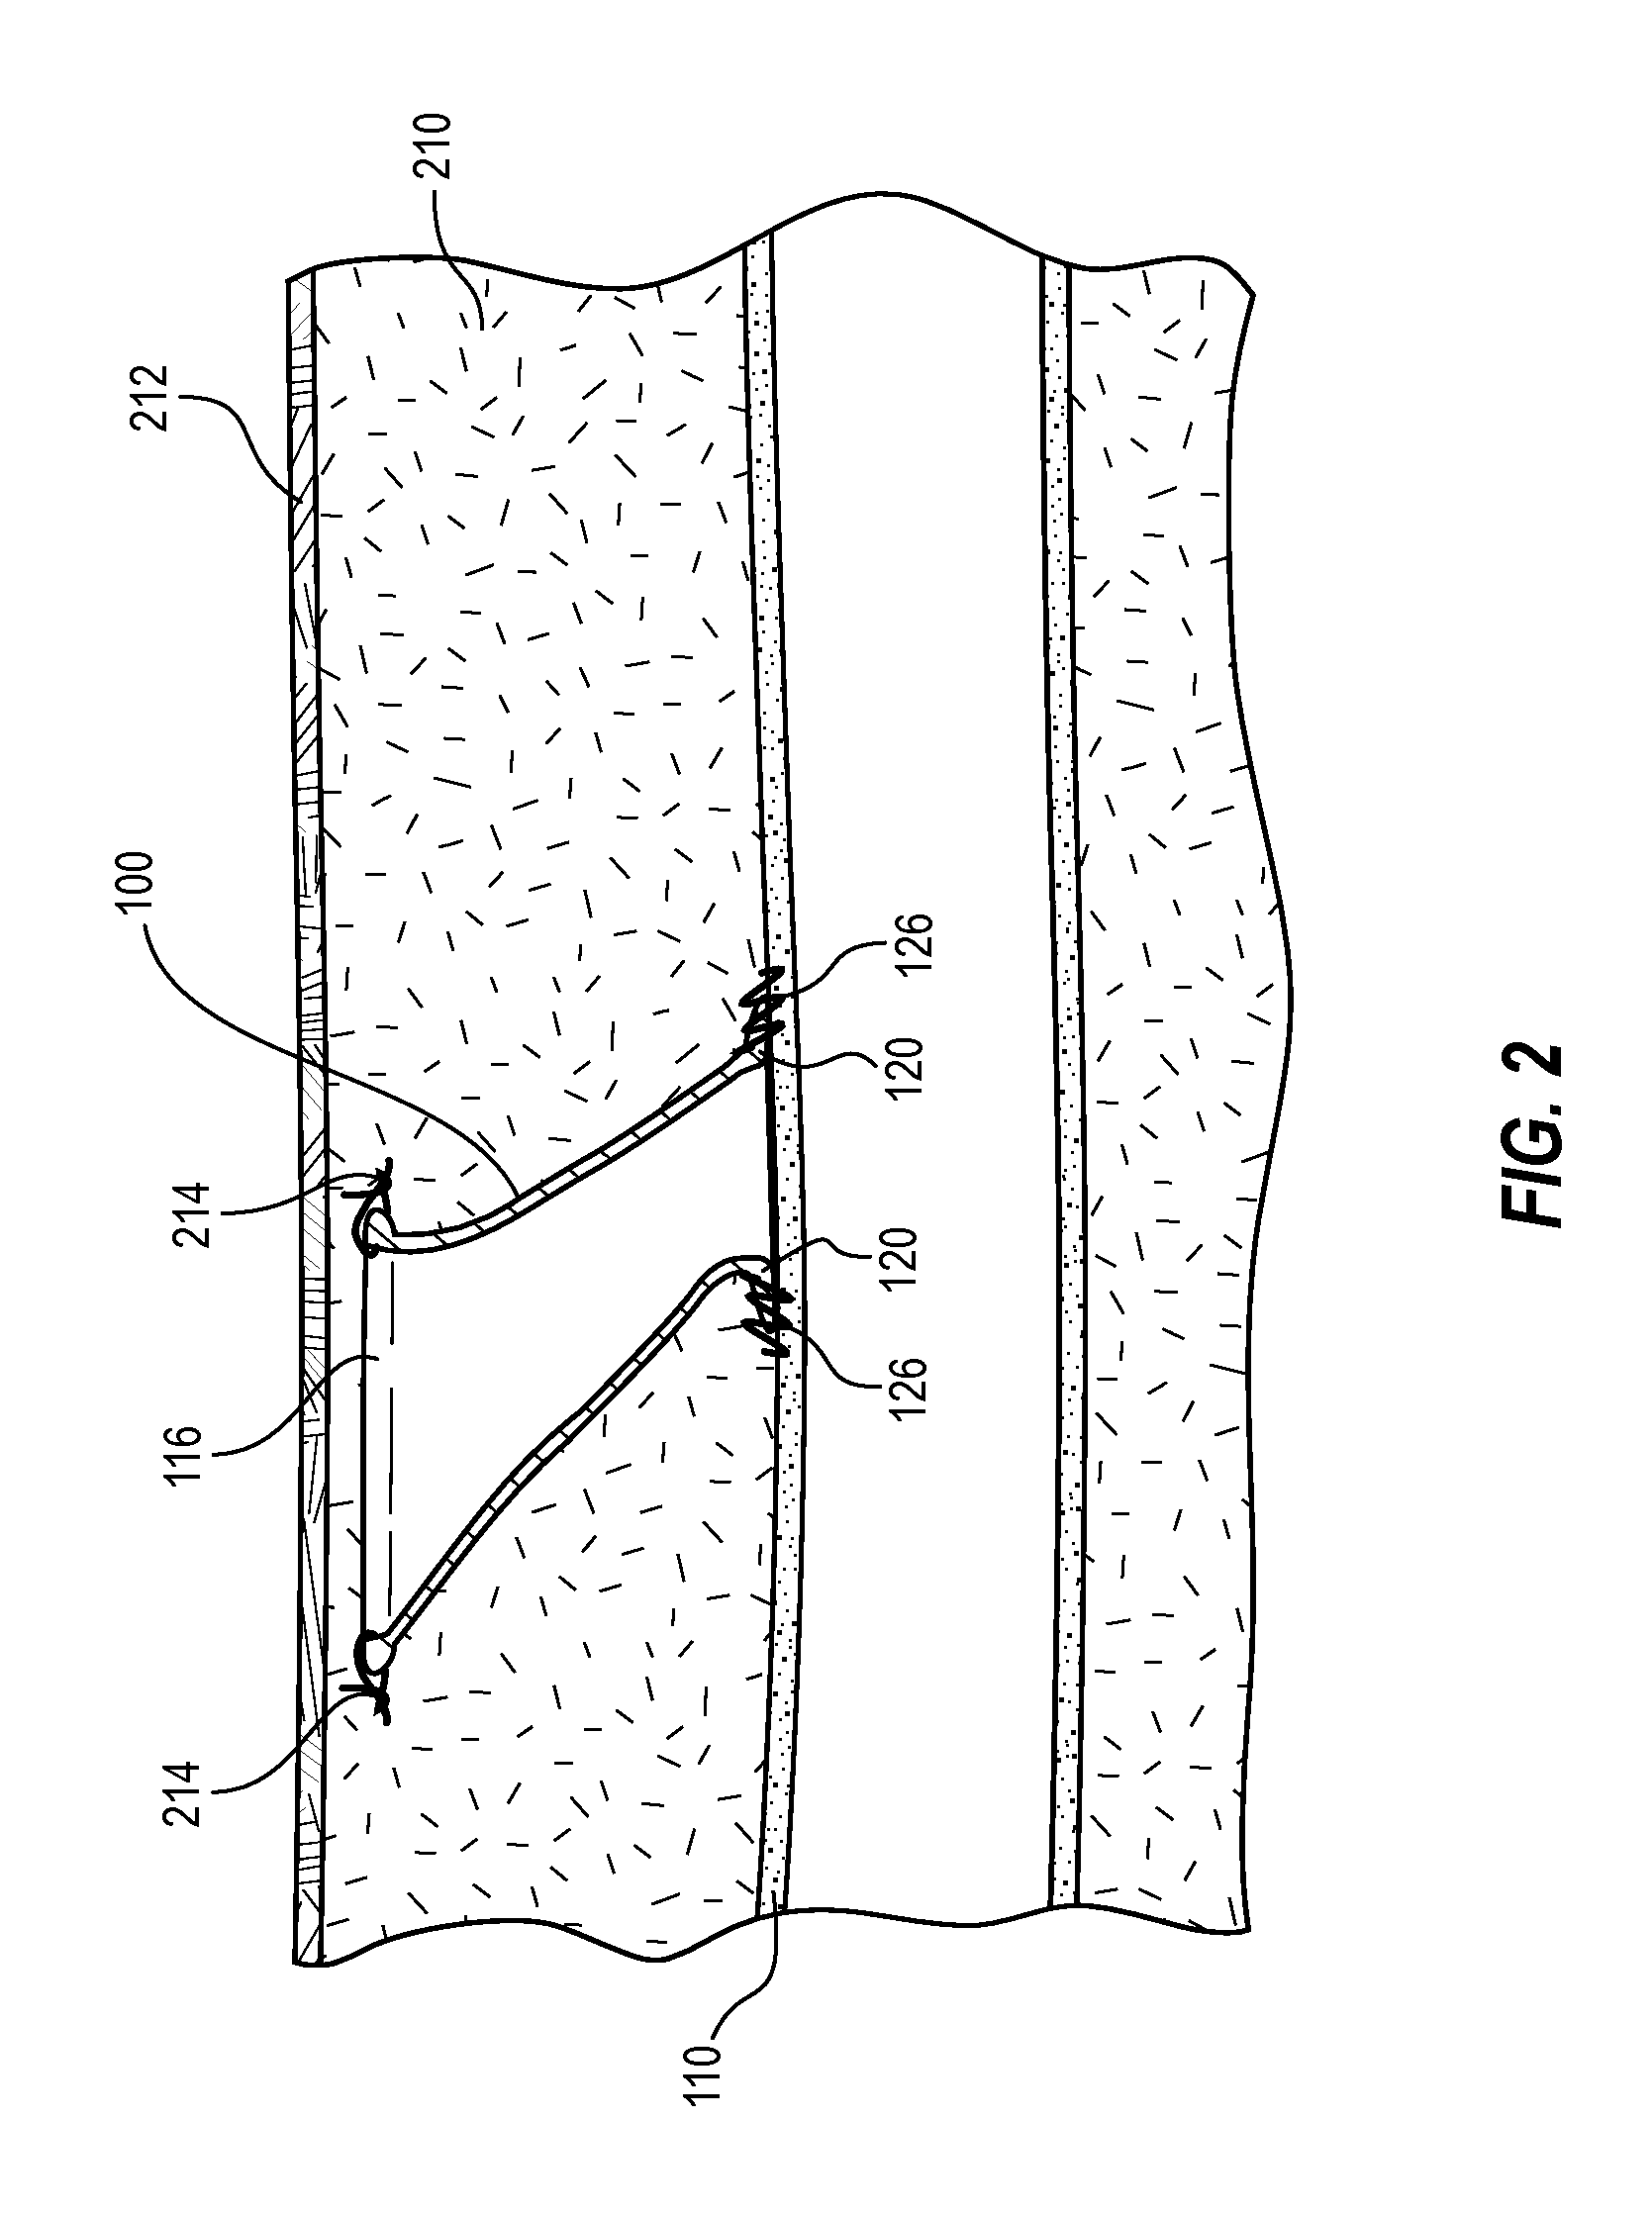 Repetitive entry conduit for blood vessels